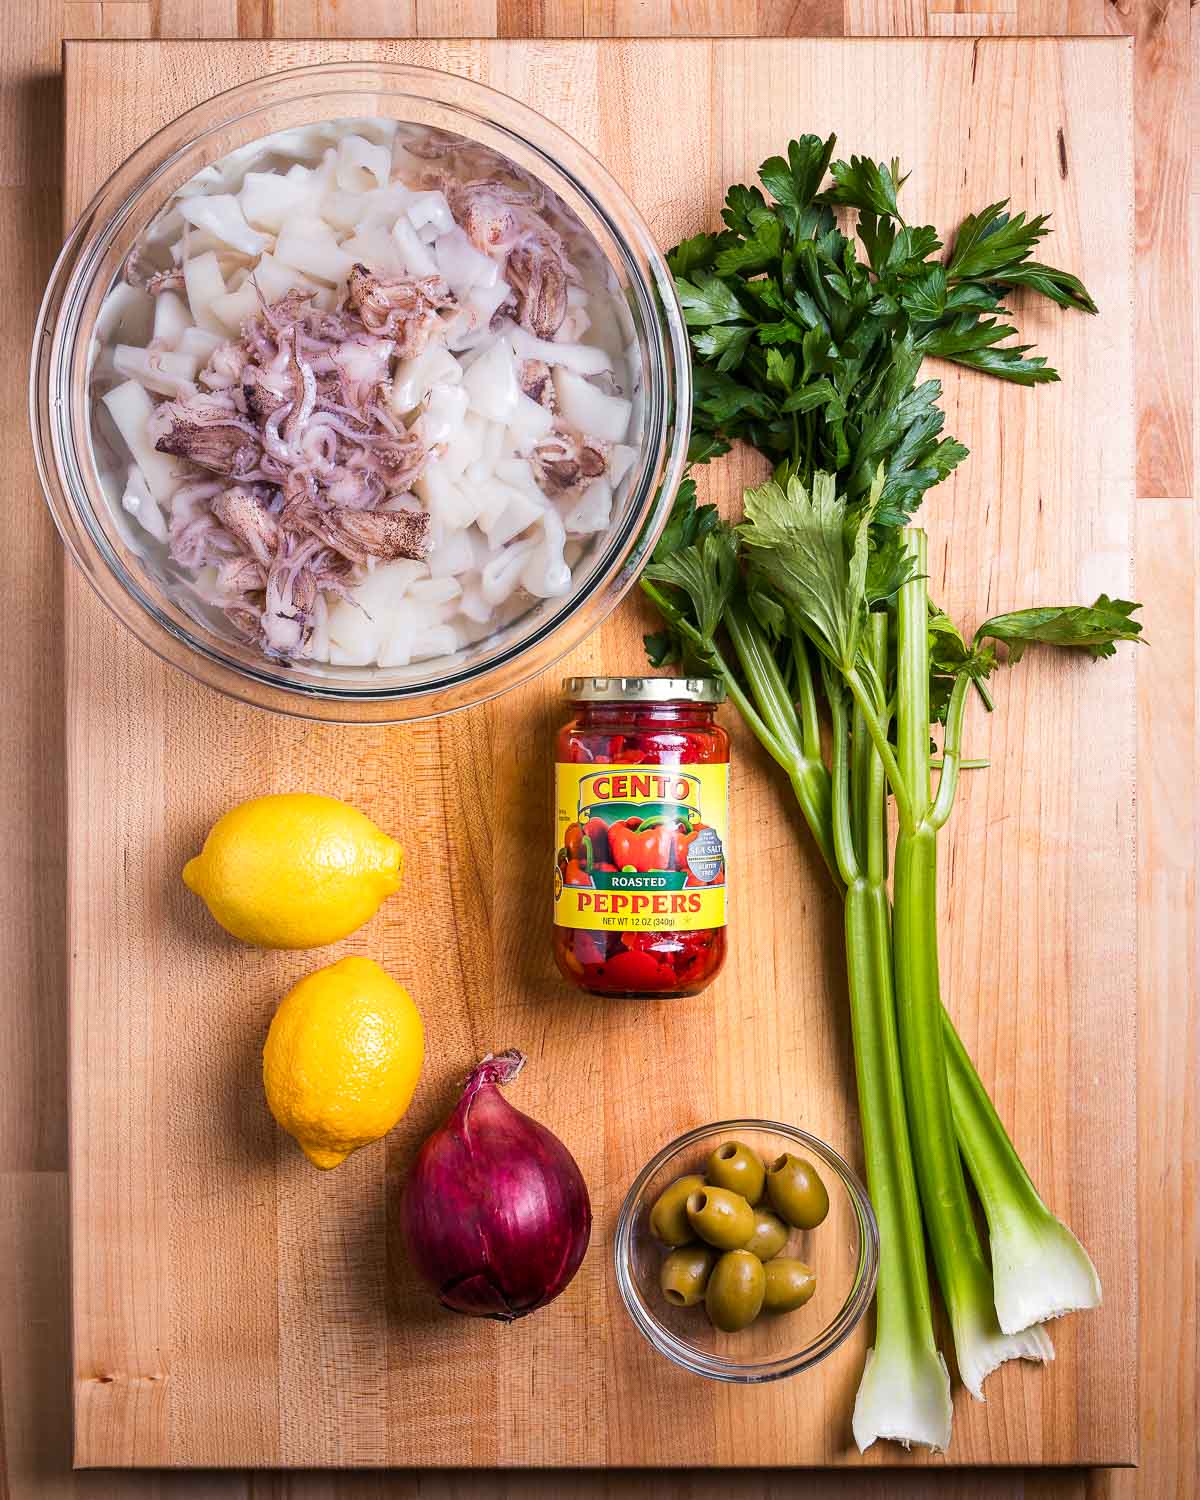 Ingredients shown: bowl of calamari, celery, parsley, lemons, roasted red peppers, red onion, and olives.